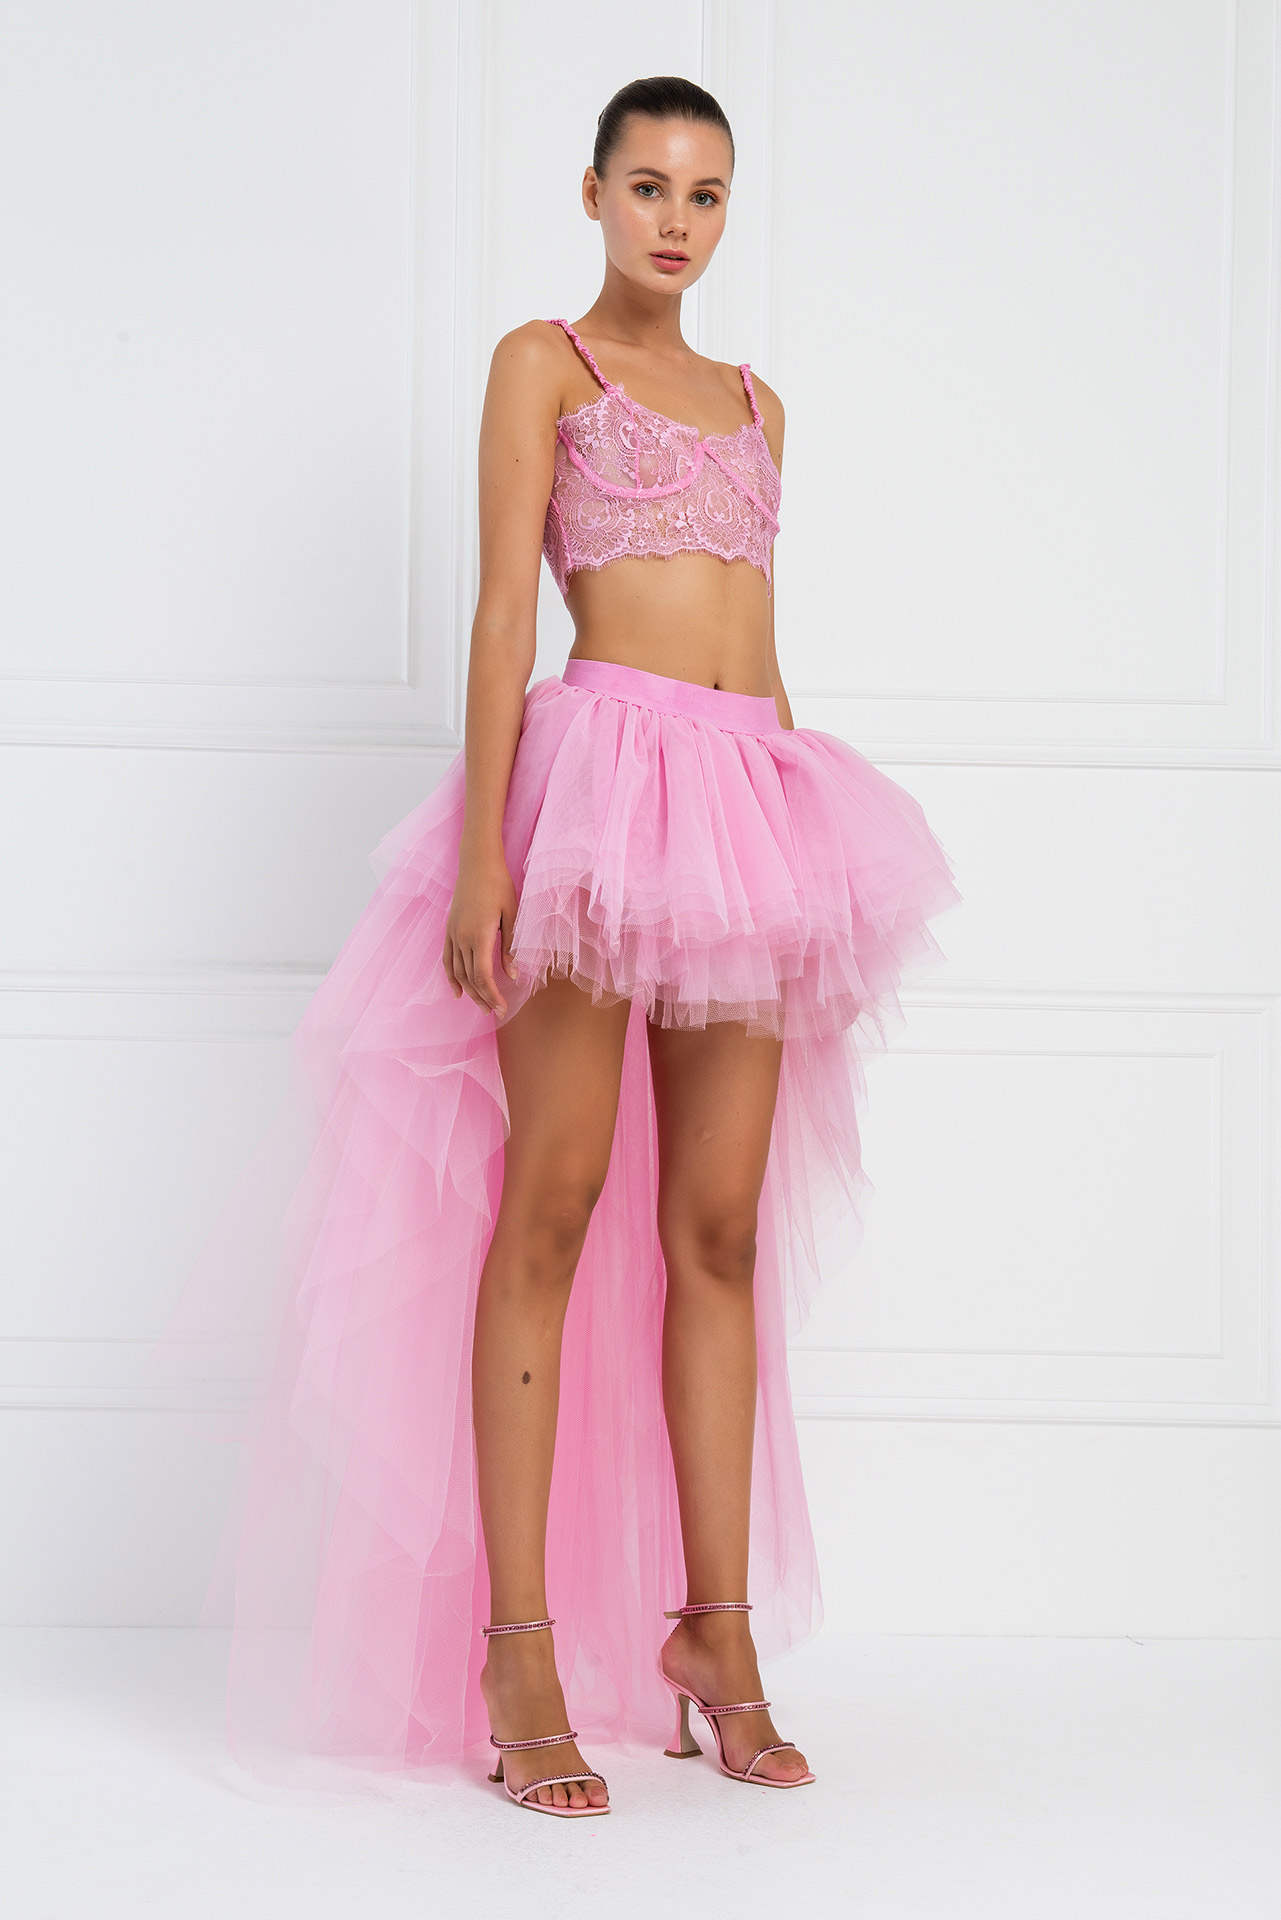 Wholesale High Low New Pink Tulle Skirt